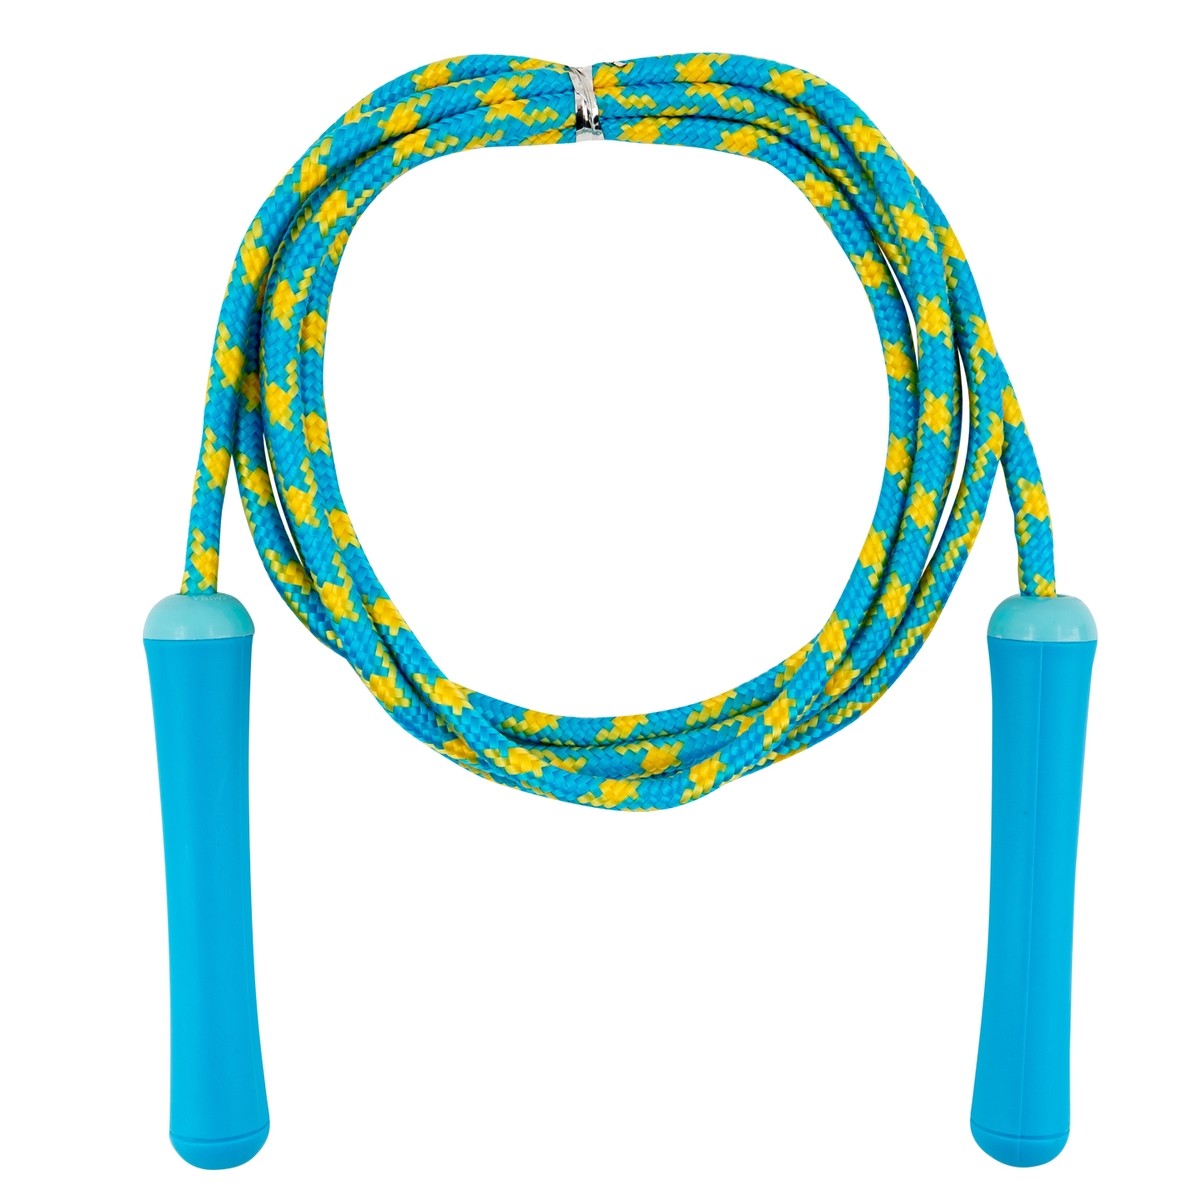 SKIPPING ROPE  Poundstretcher